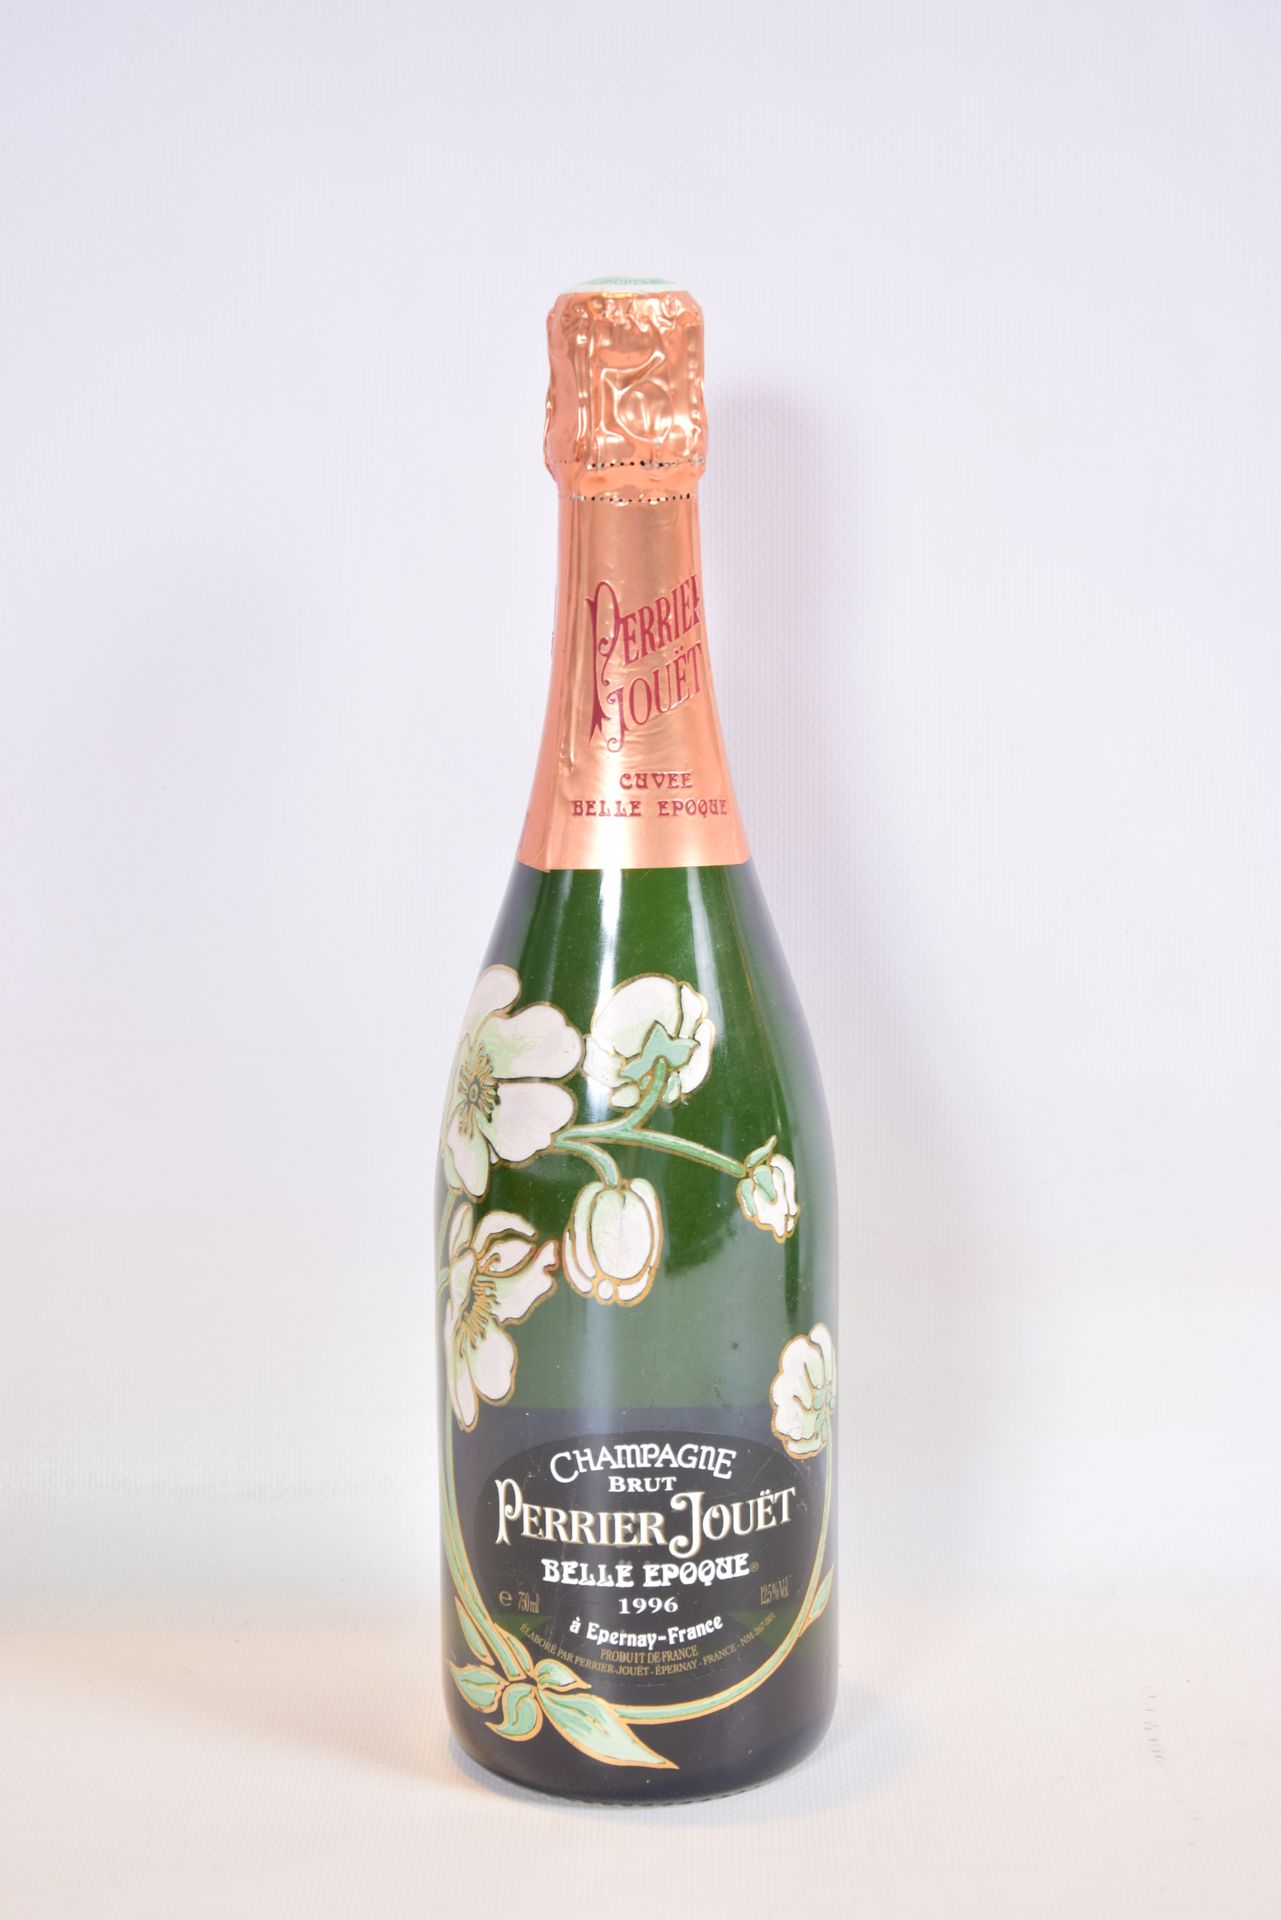 Null 1 Blle Champagne PERRIER JOUËT Belle Epoque Brut 1996

	介绍和水平，无可挑剔。